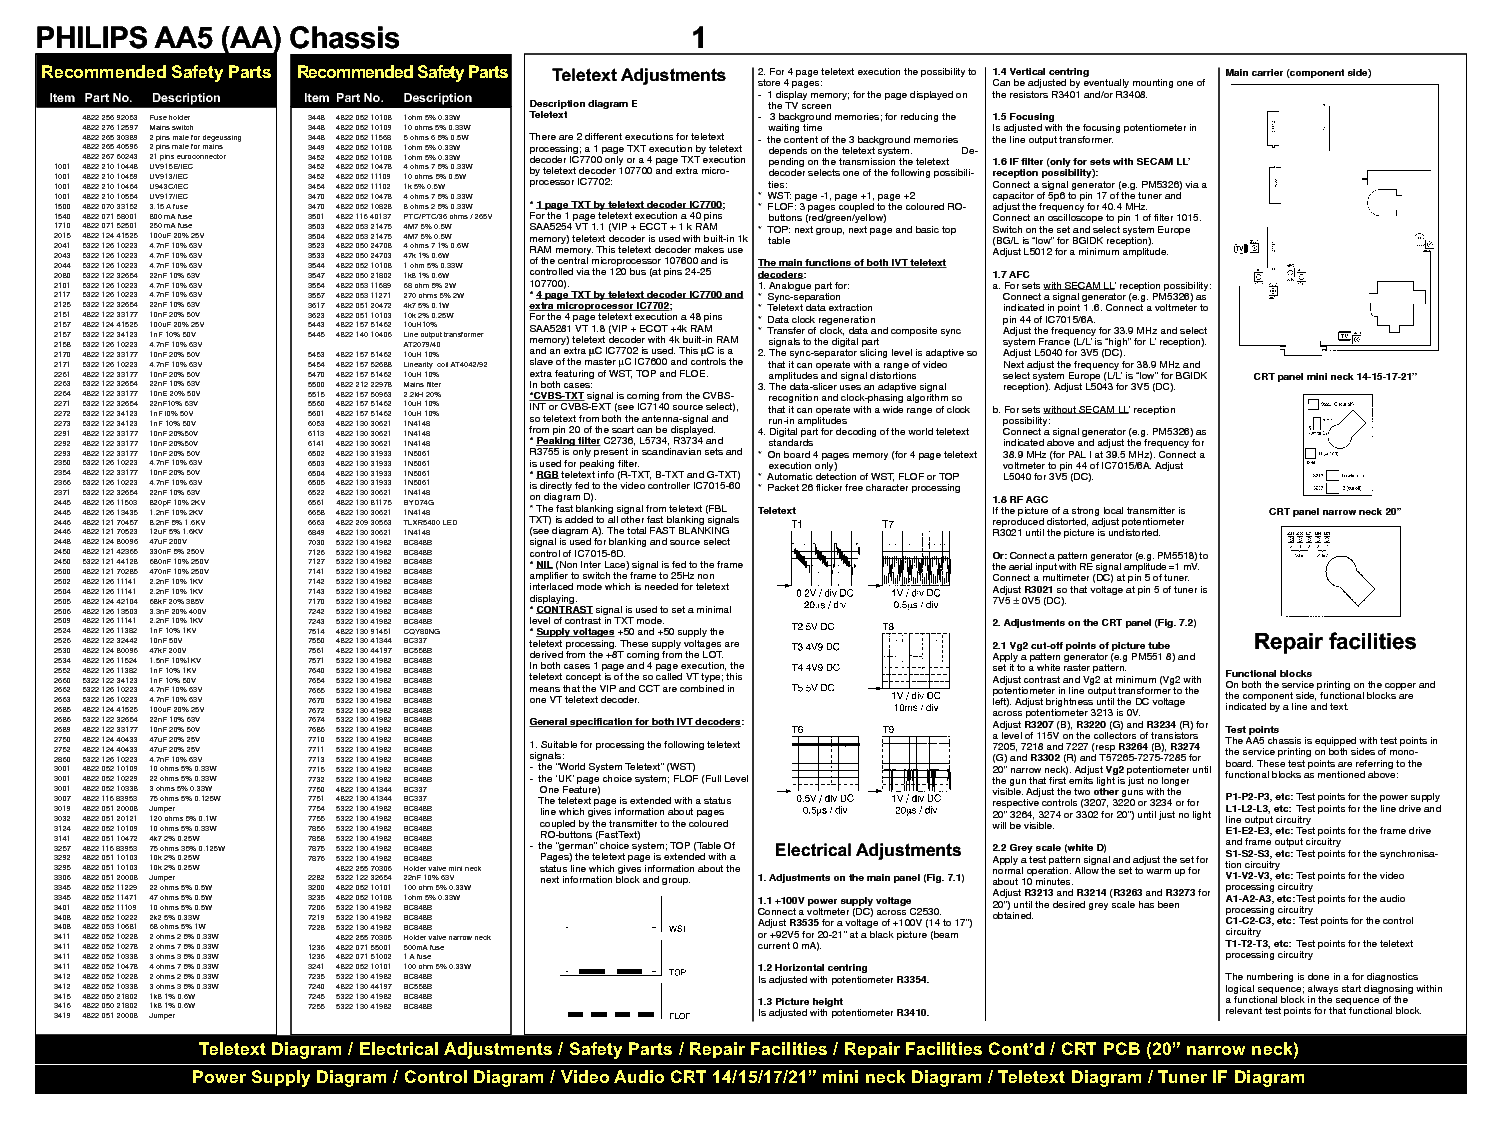 PHILIPS CHASSIS-AA5-AA service manual (1st page)